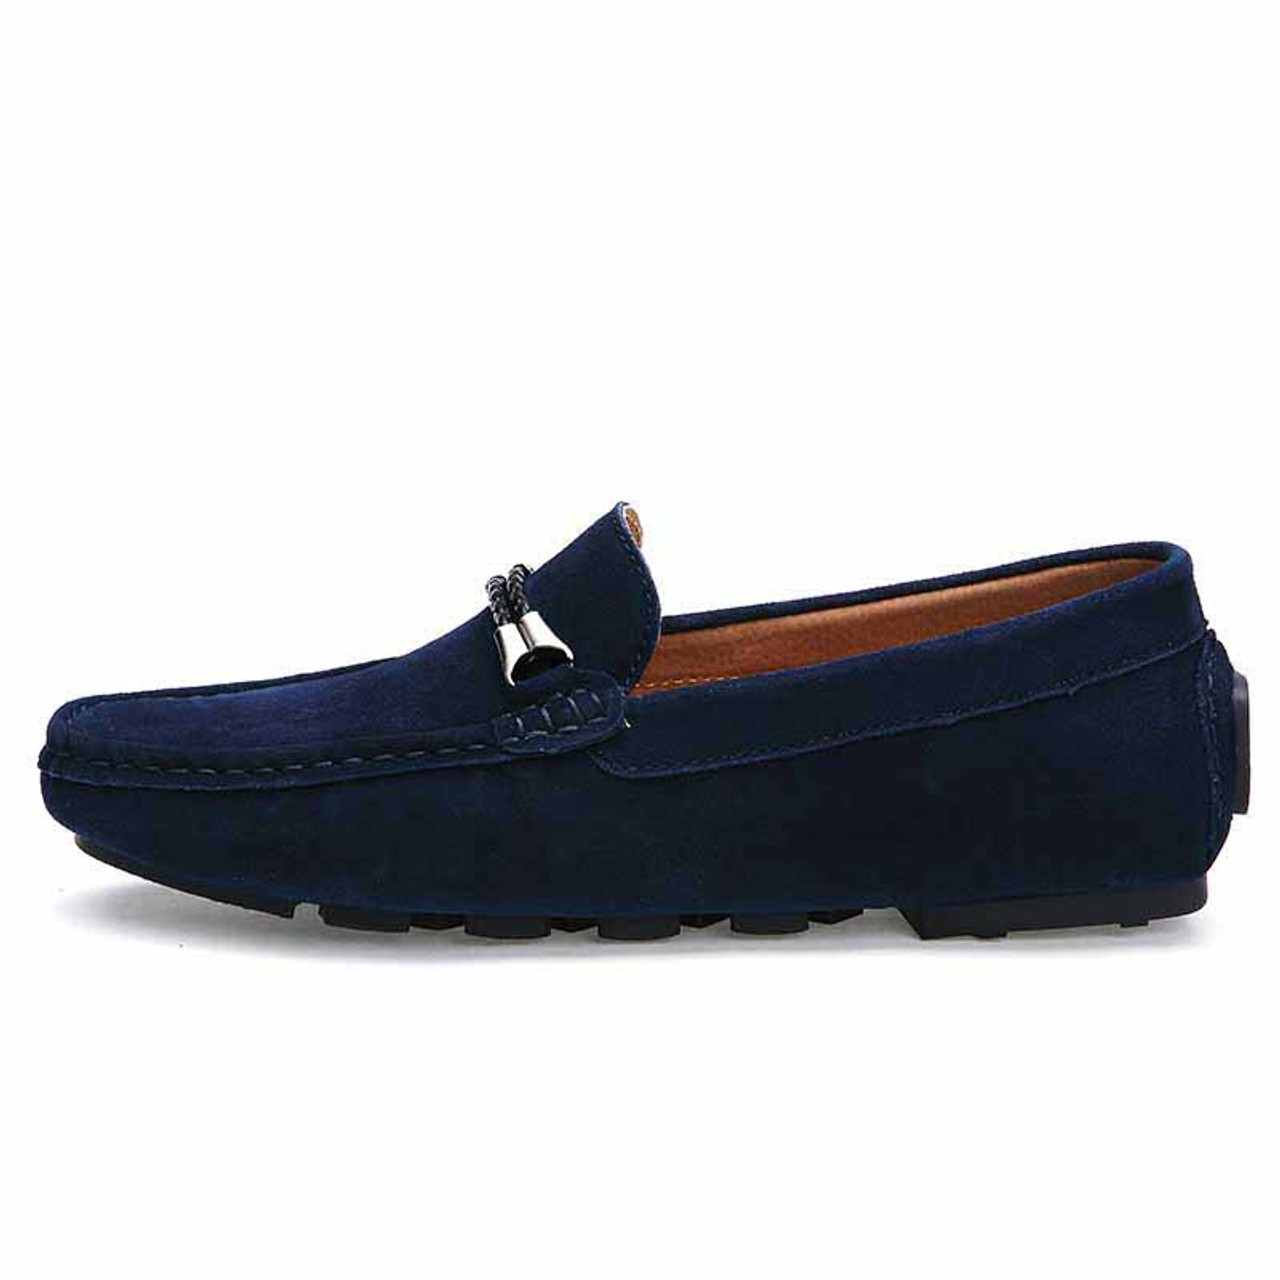 Blue twin rope leather slip on shoe loafer | Mens shoes online 1232MS